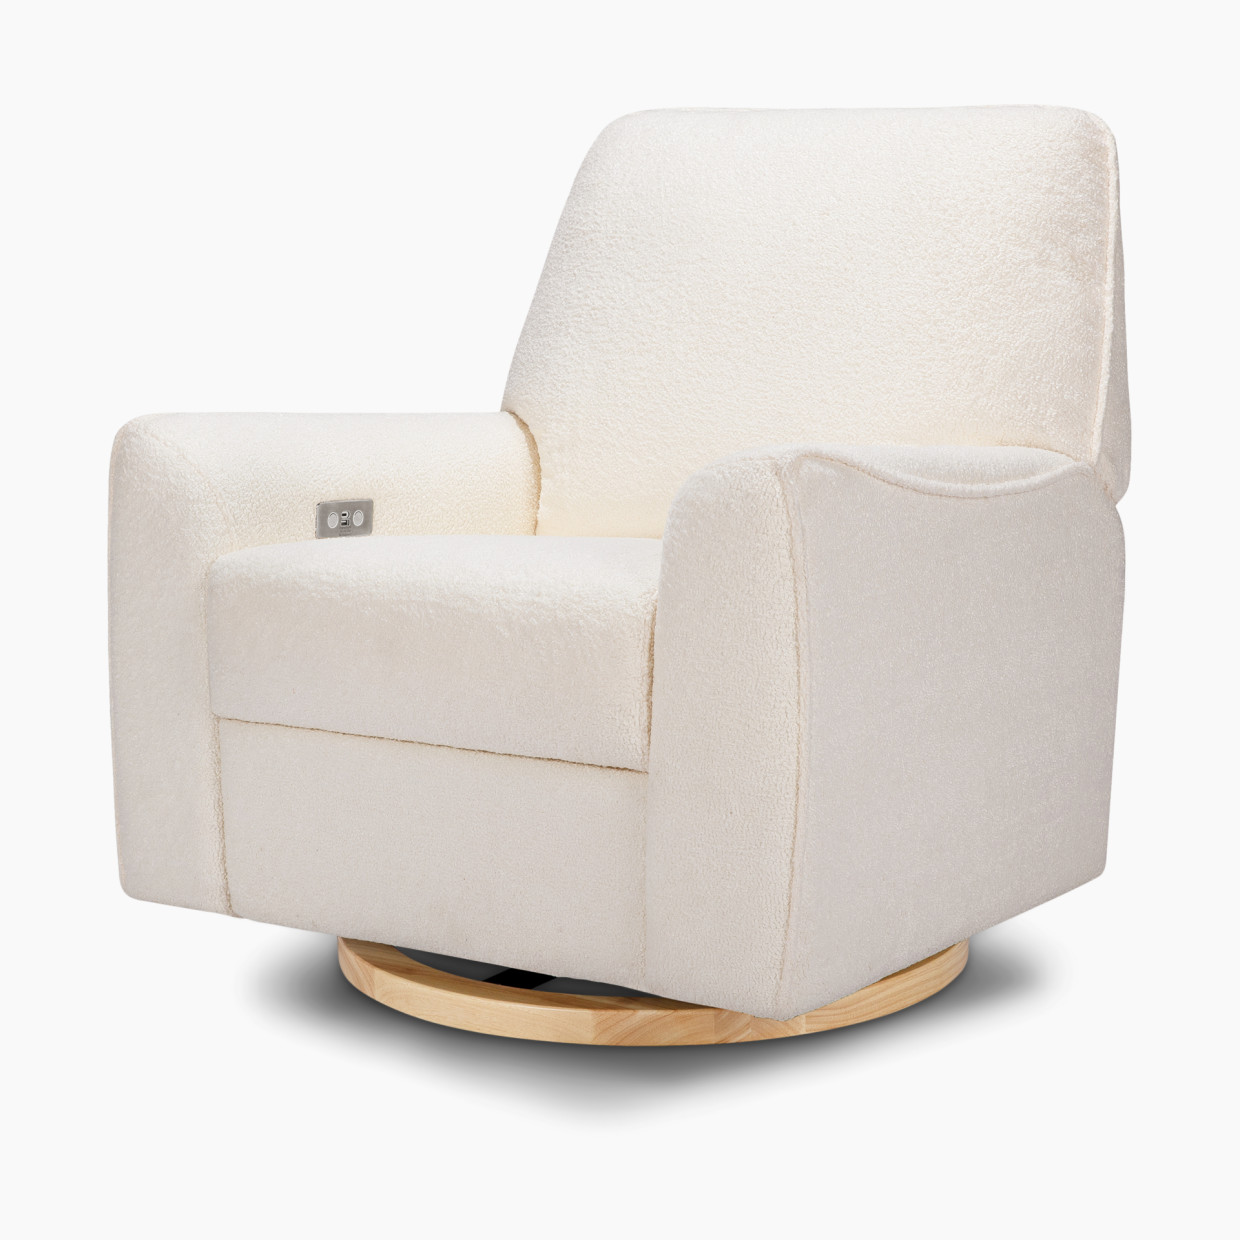 Nursery Works Sunday Power Recliner and Swivel Glider - Chantilly Fleece With Light Wood Base.